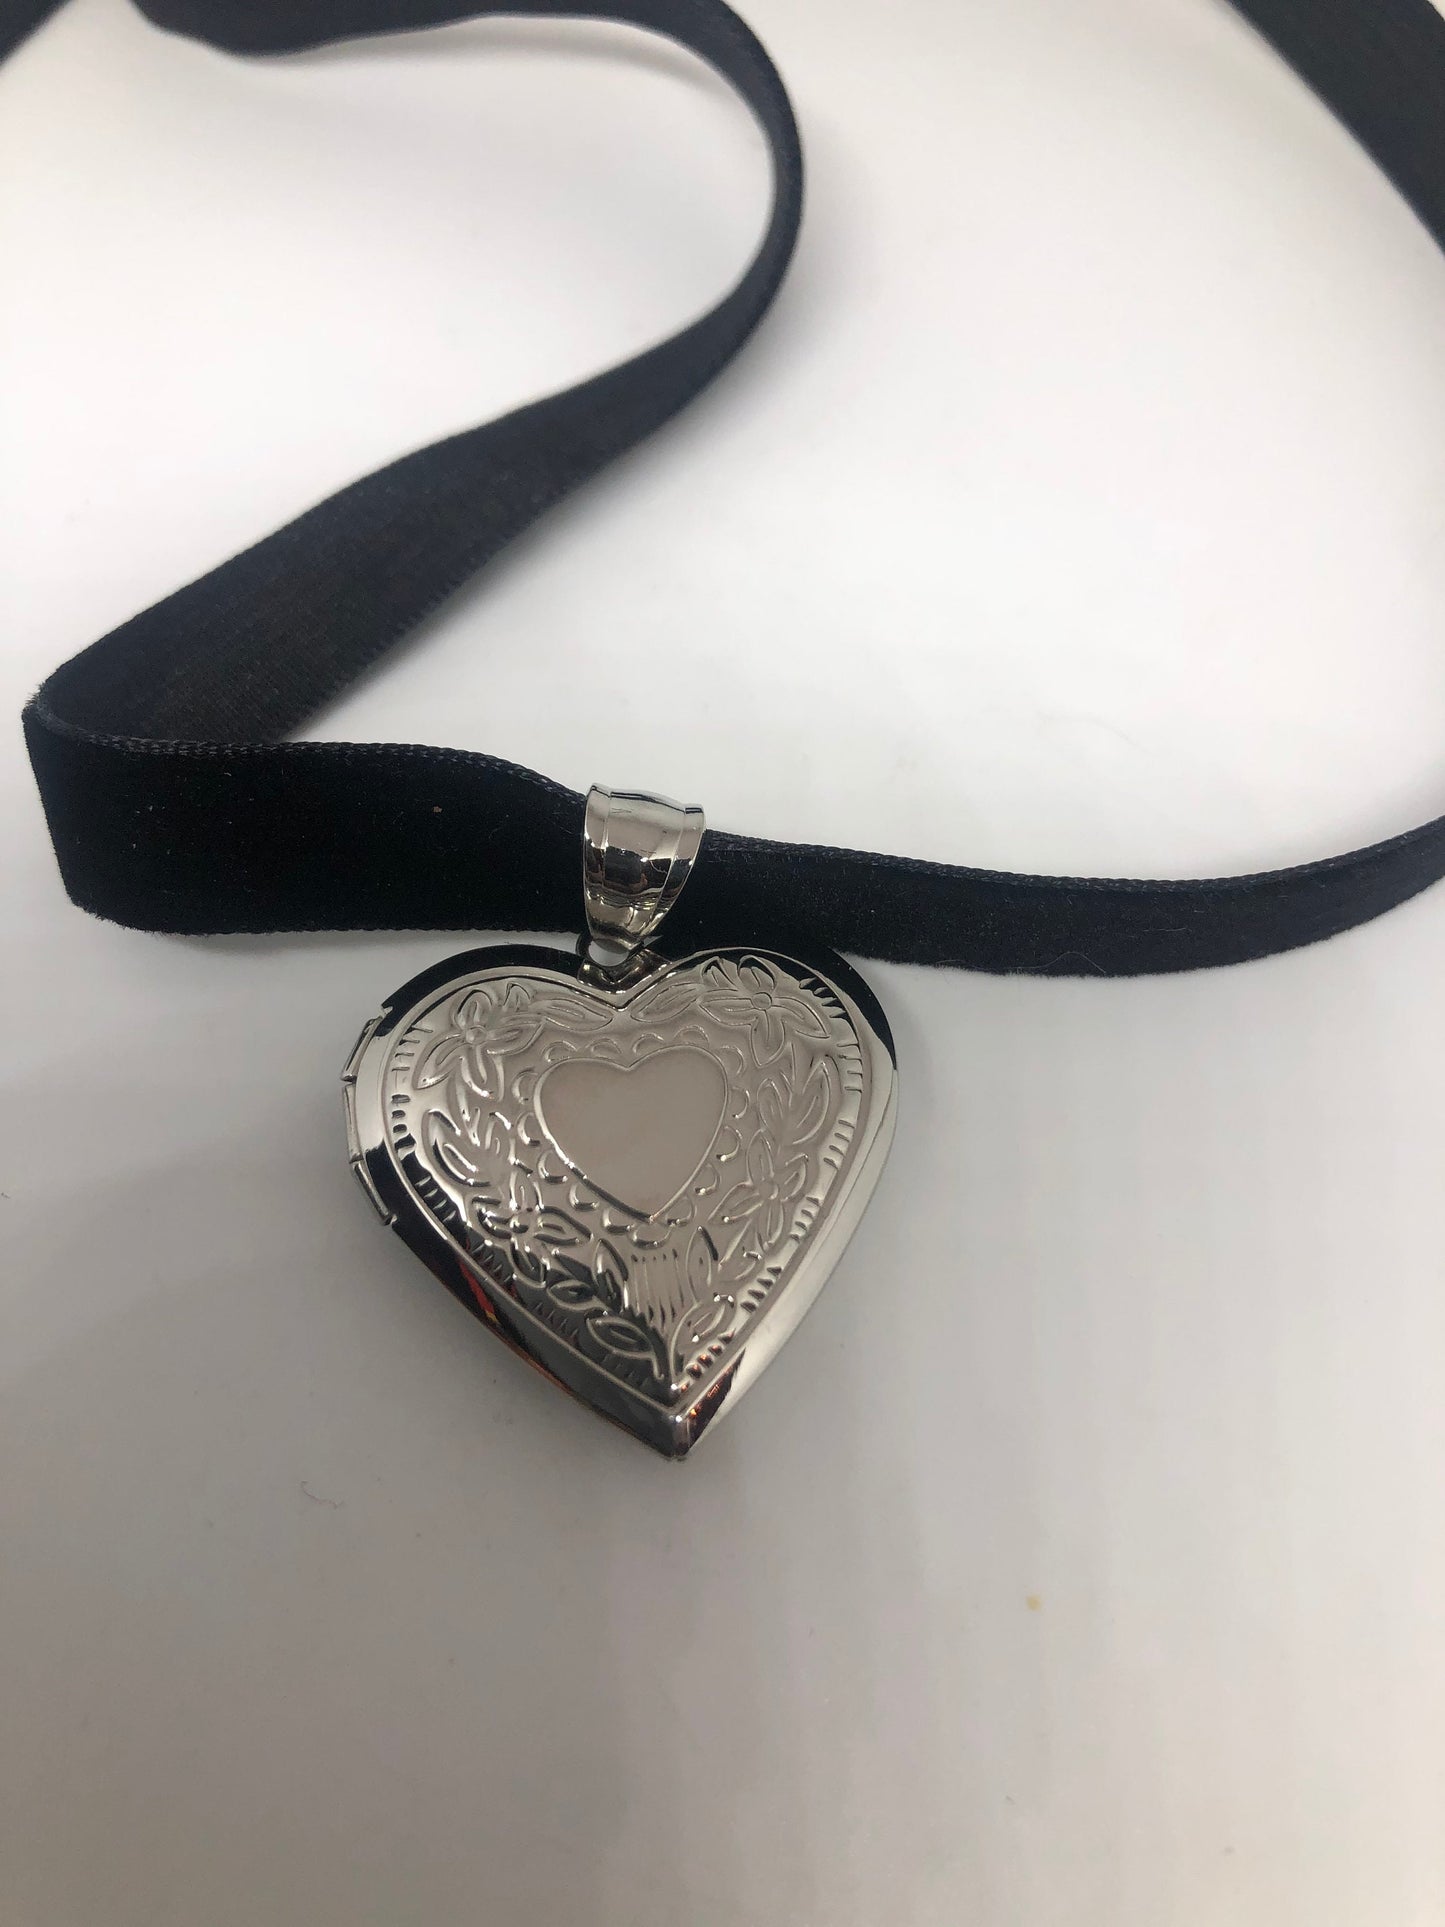 Vintage Silver Locket | Tiny Heart Photo Charm Stainless Steel Deco Etched Choker Necklace